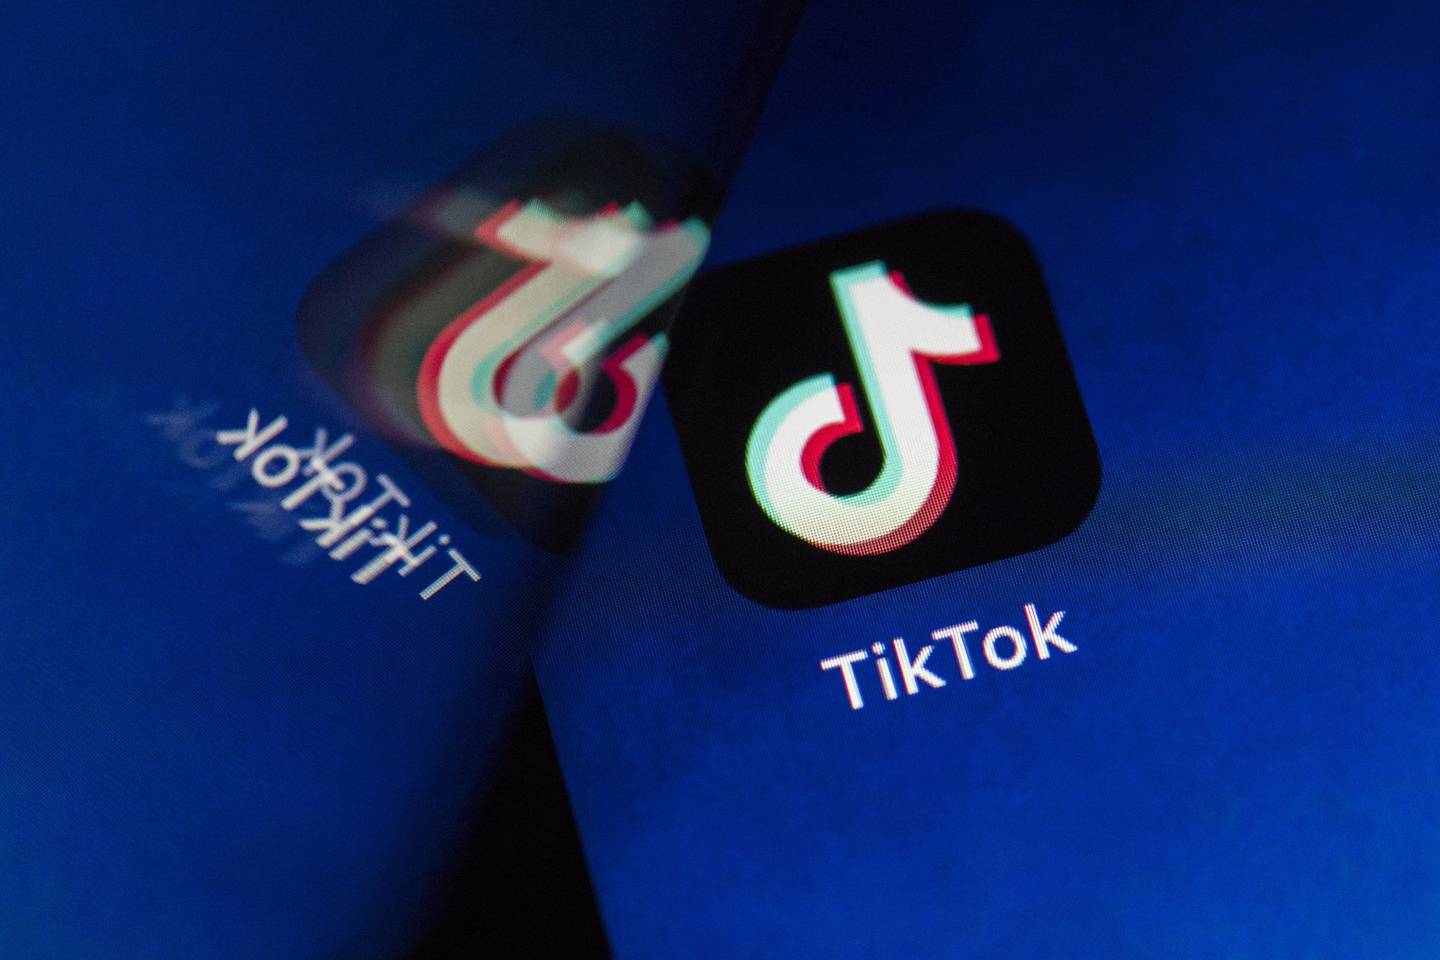 ByteDance Ltd.'s TikTok app button, reflected in a mirror, is arranged for a photograph on a smartphone